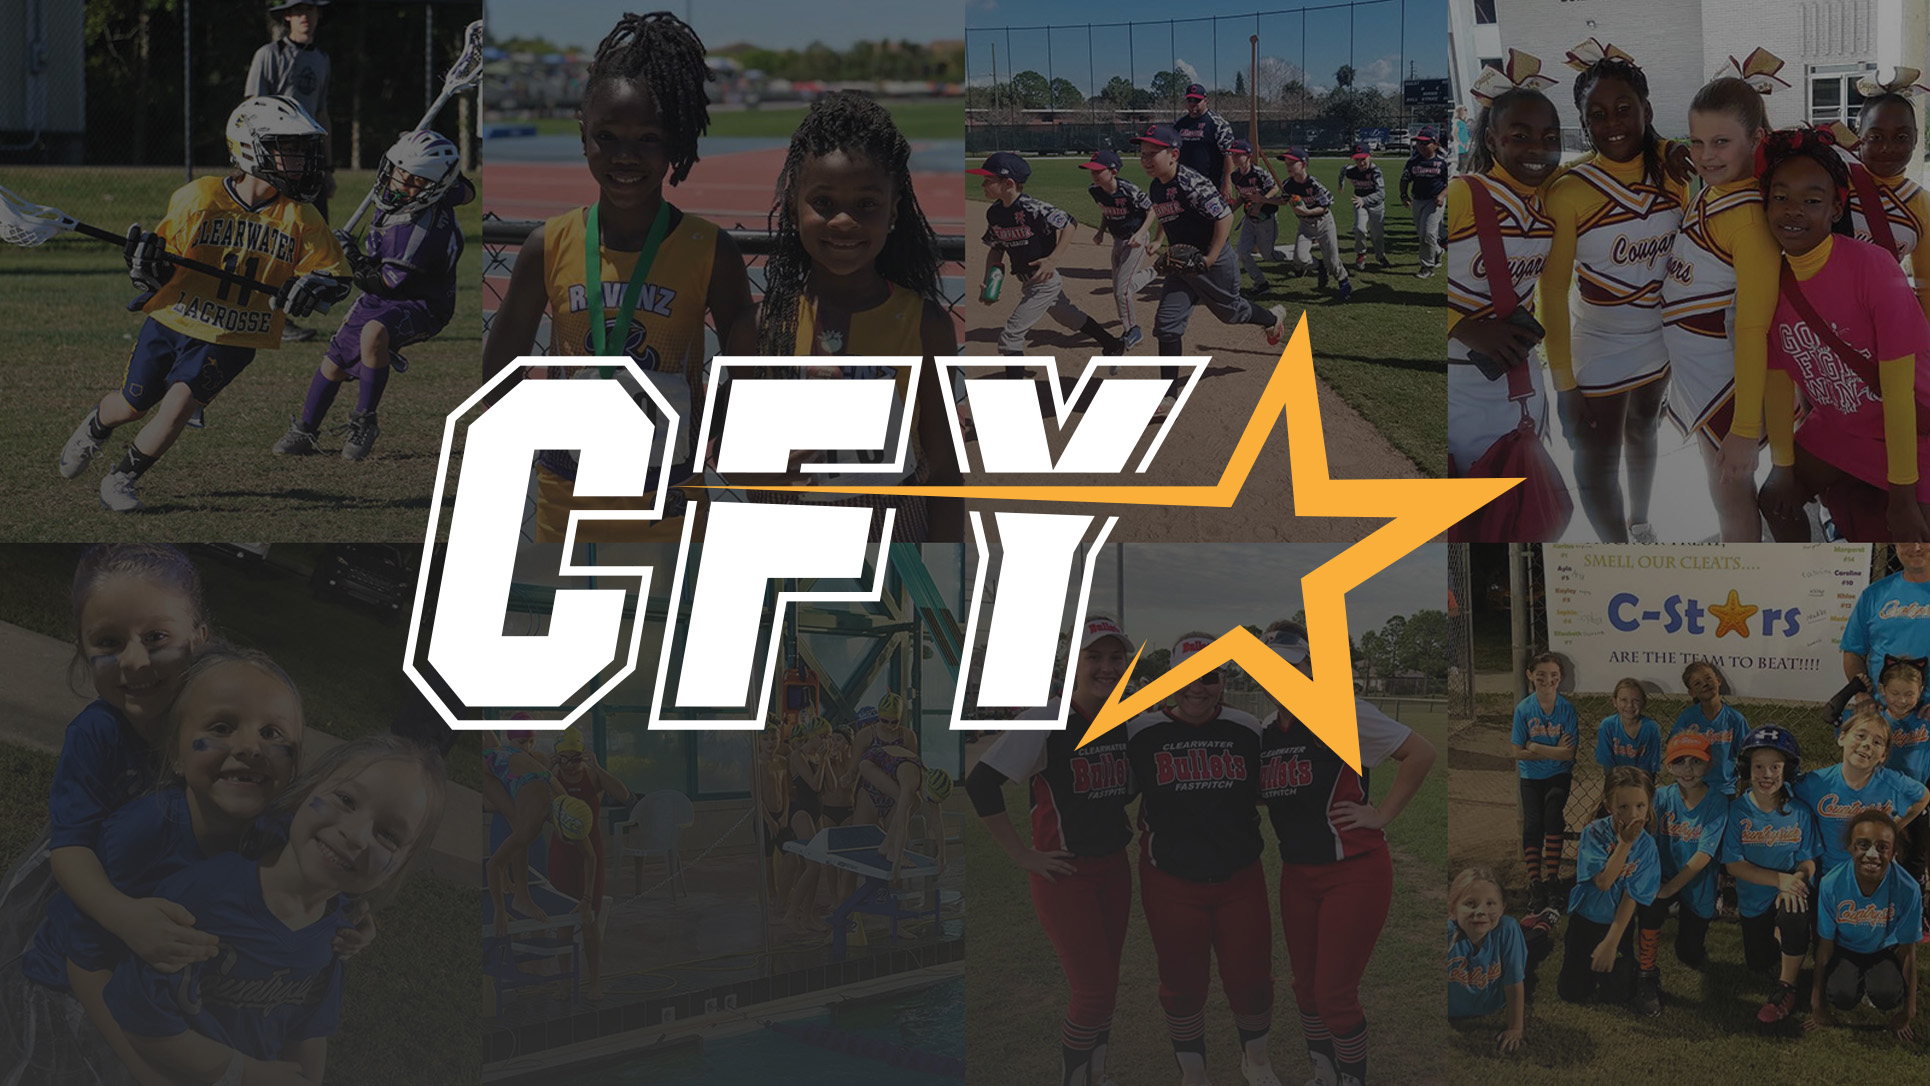 Clearwater For Youth | CFY Pinellas